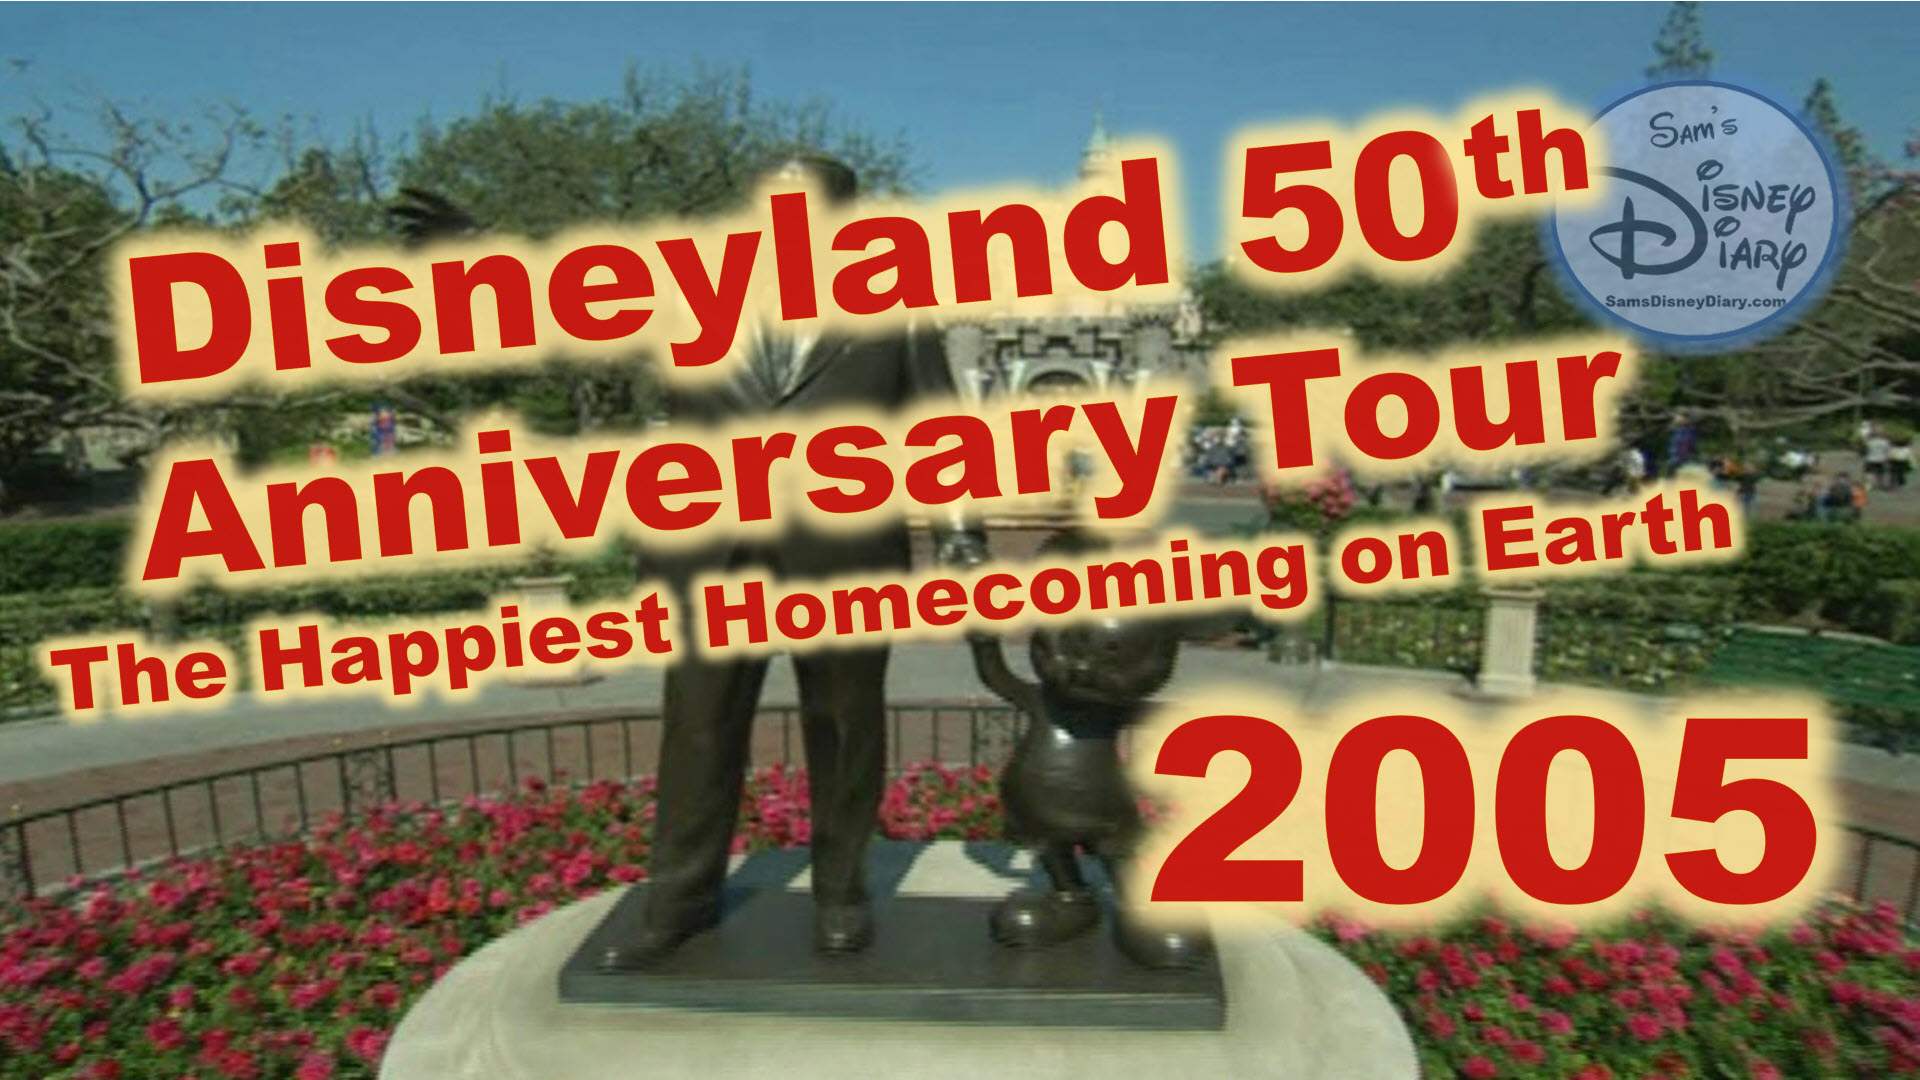 Disneyland 50th Anniversary The Happiest Homecoming on Earth